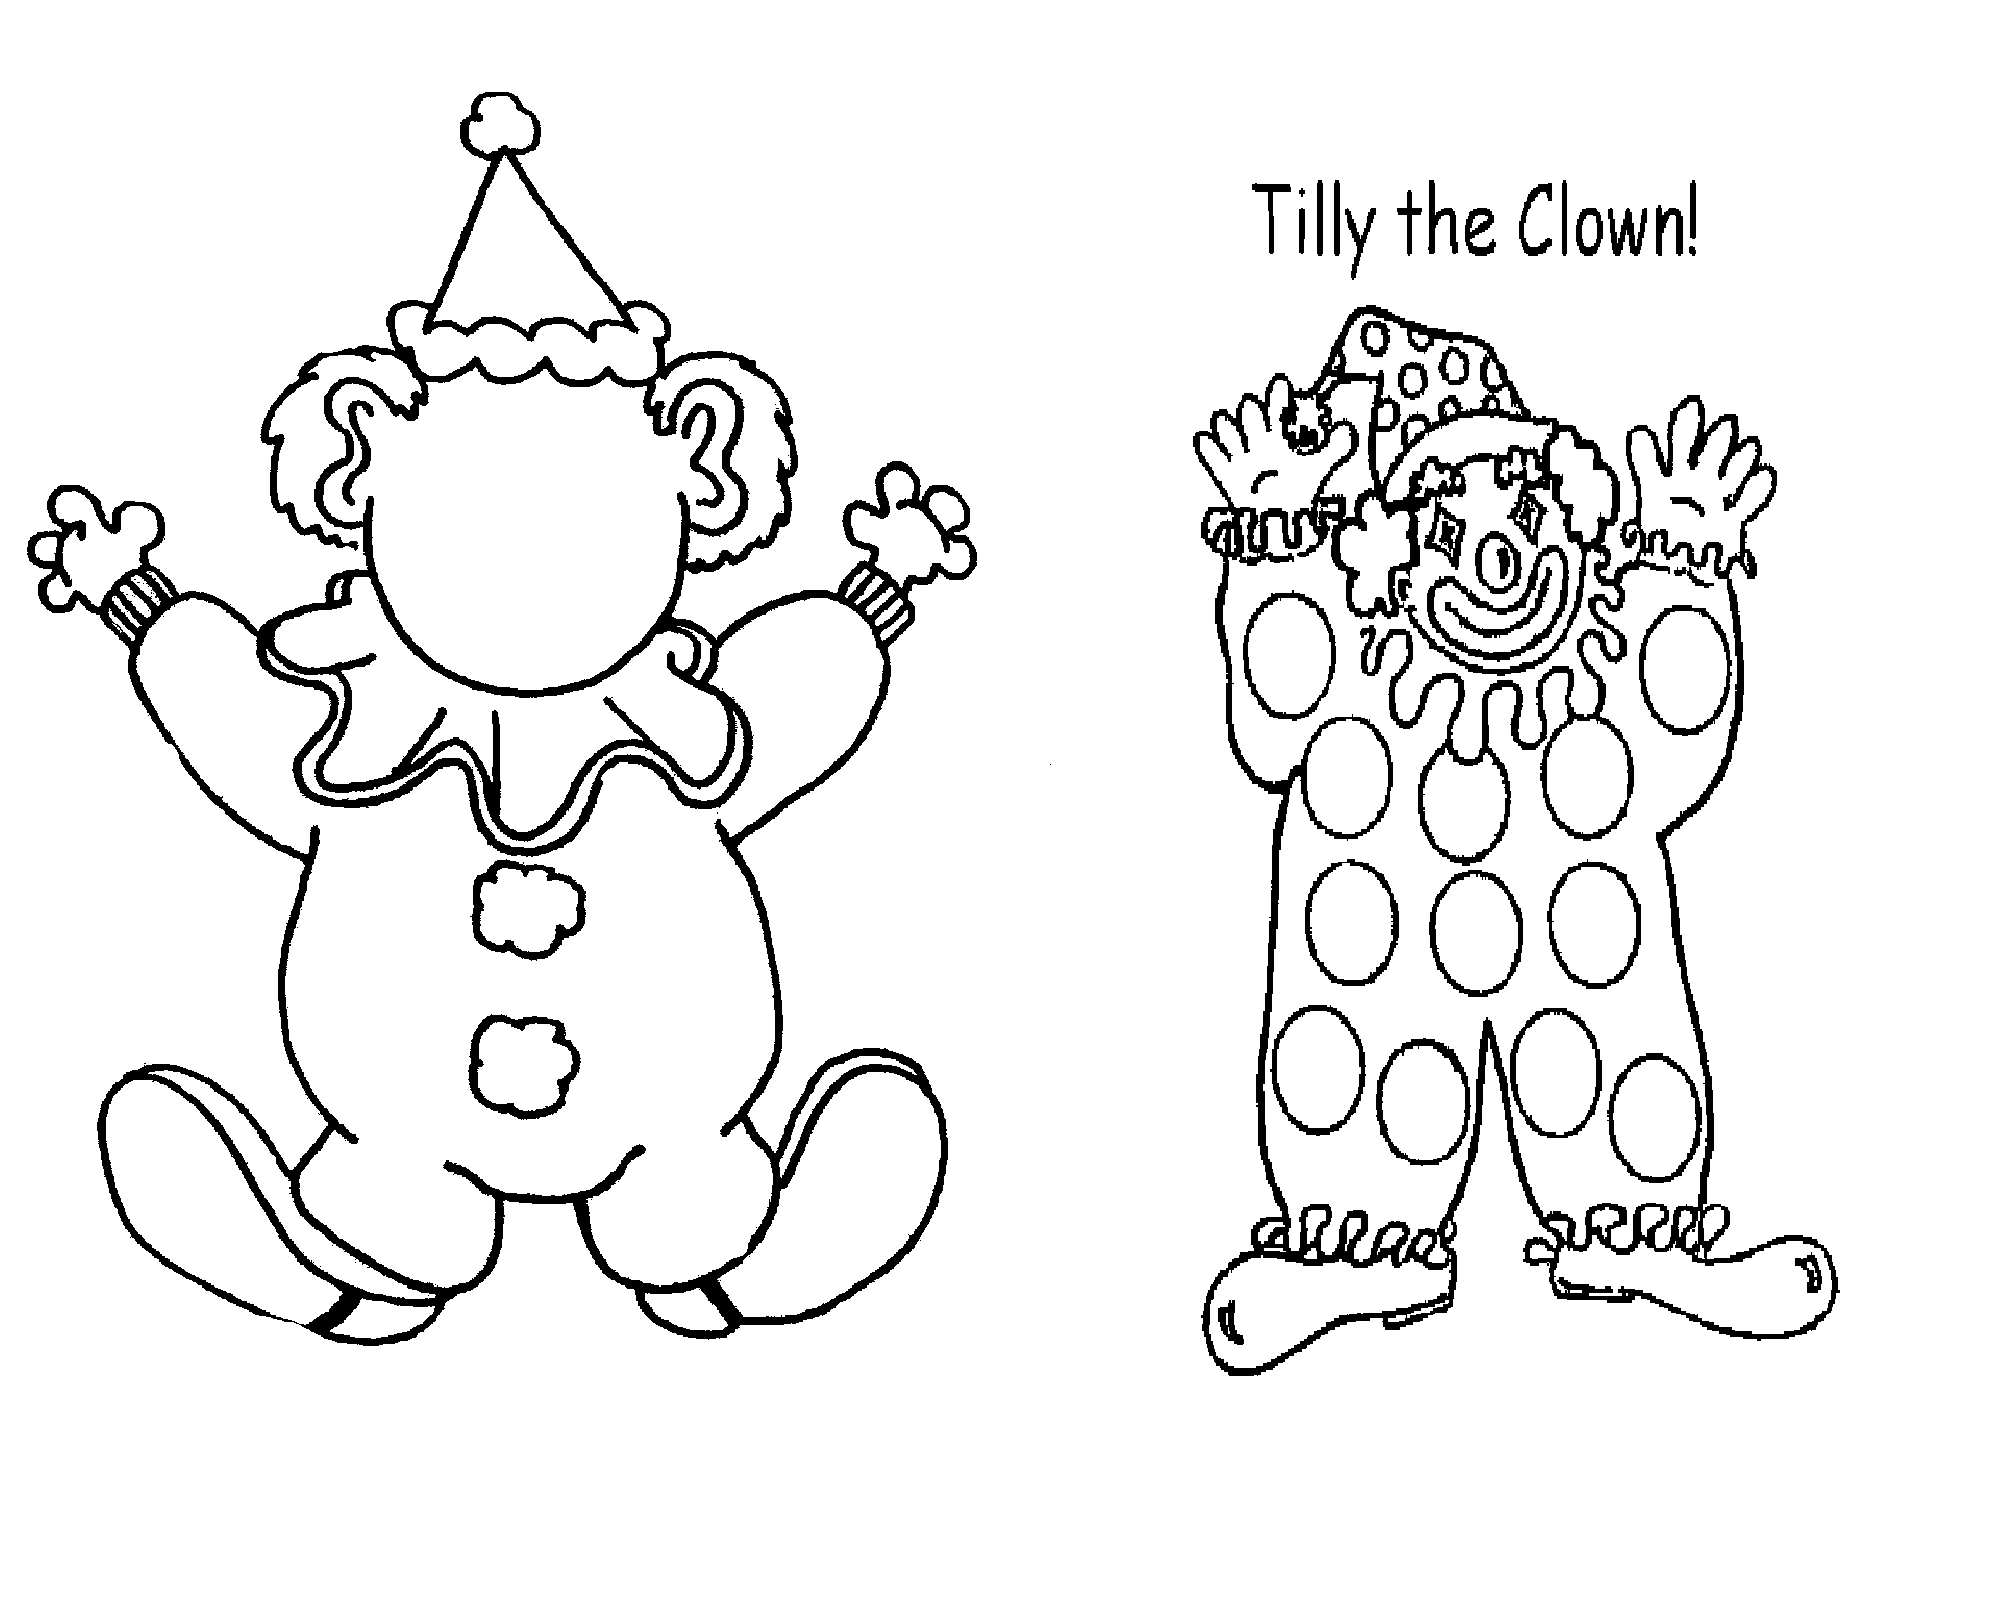 Cartoon Clown Appealing Coloring Page